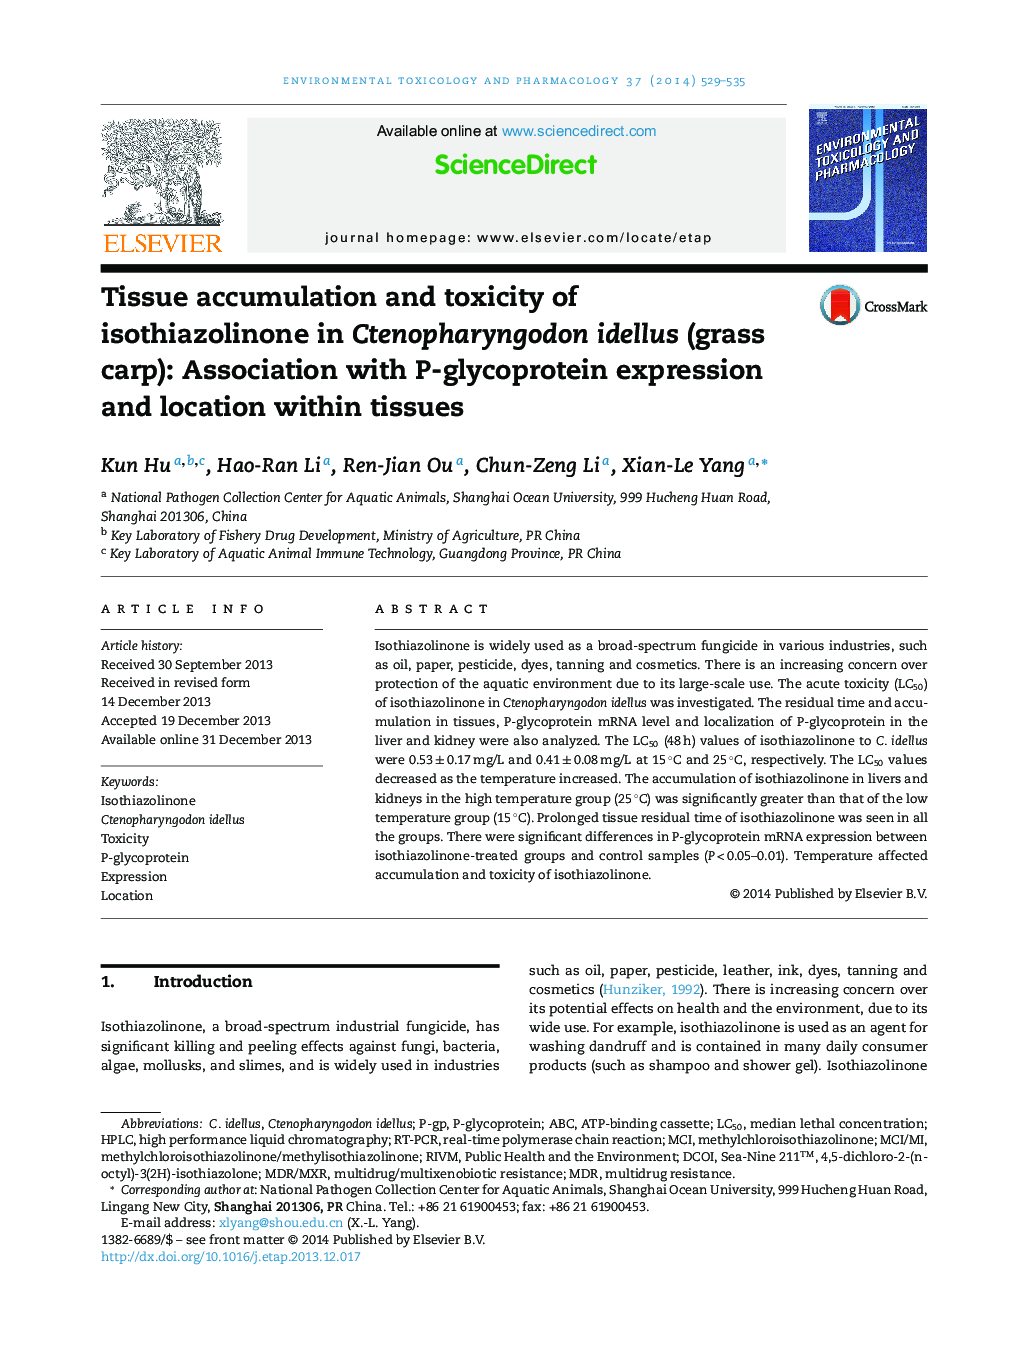 Tissue accumulation and toxicity of isothiazolinone in Ctenopharyngodon idellus (grass carp): Association with P-glycoprotein expression and location within tissues